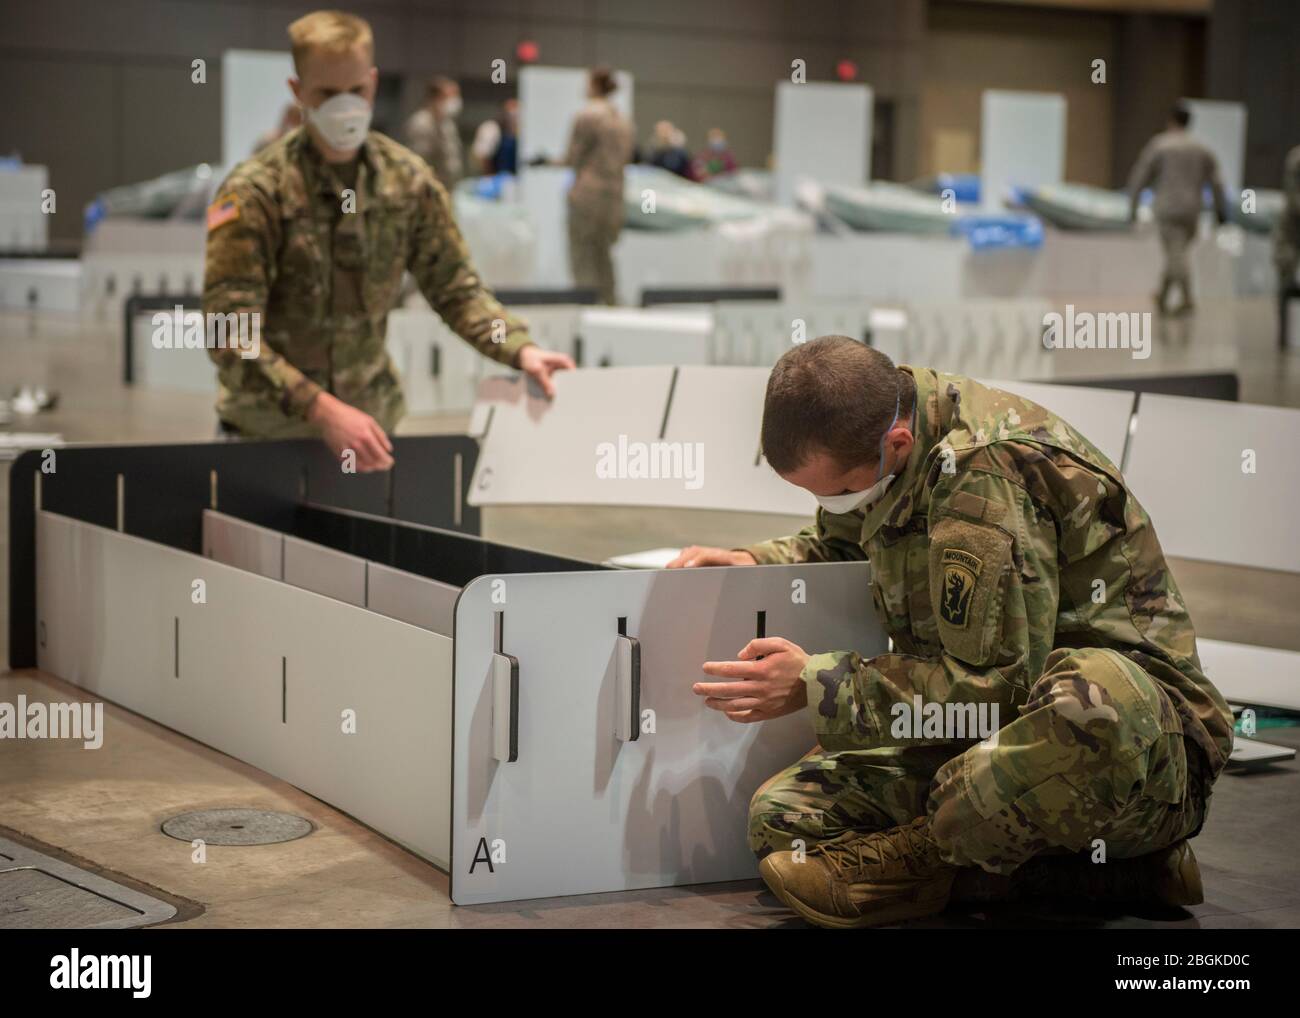 Soldiers from the 1-102nd Infantry Regiment construct a field hospital bed at the Connecticut Convention Center in Hartford, Connecticut, April 11, 2020. Soldiers and Airmen from the Connecticut National Guard are setting up over 600 beds at the site as potential hospital surge capacity for patients recovering from COVID-19. (U.S. Air National Guard photo by Staff Sgt. Steven Tucker) Stock Photo